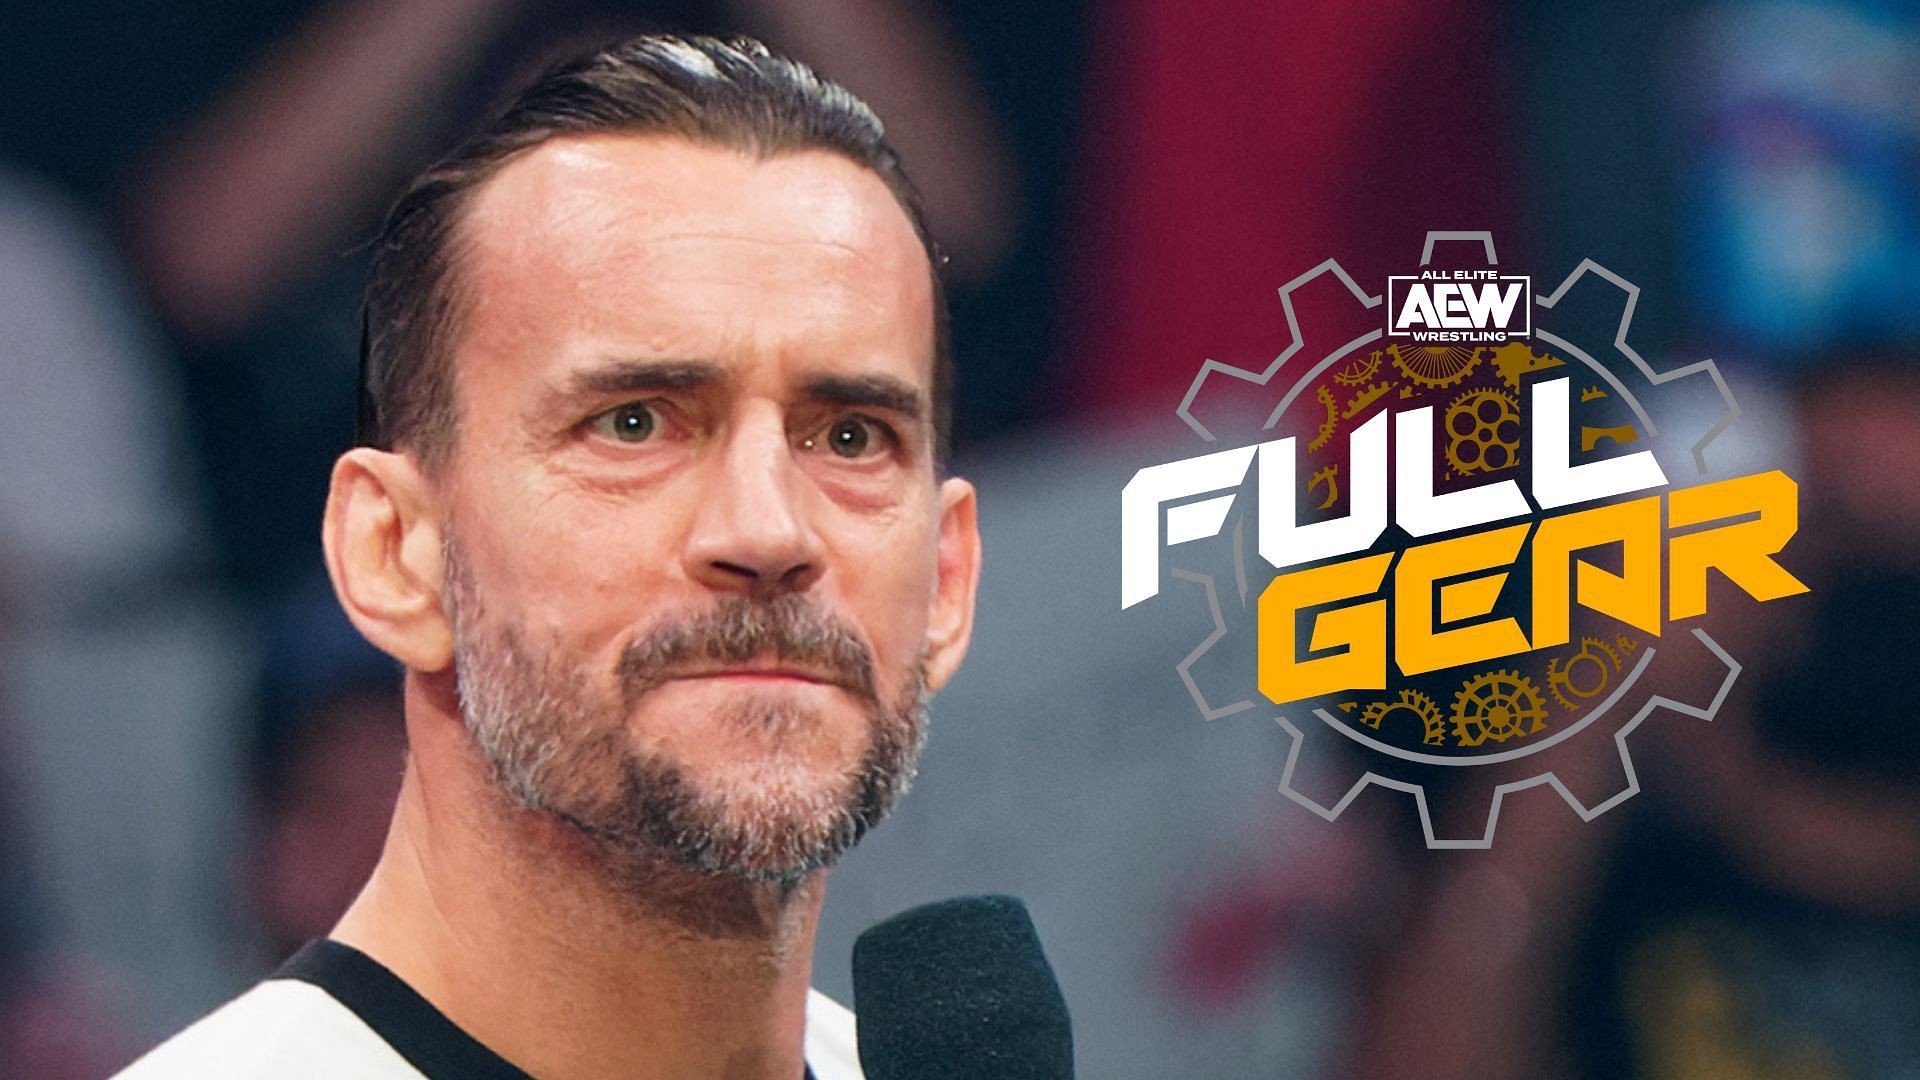 An AEW star has seemingly referenced scrapped CM Punk plans